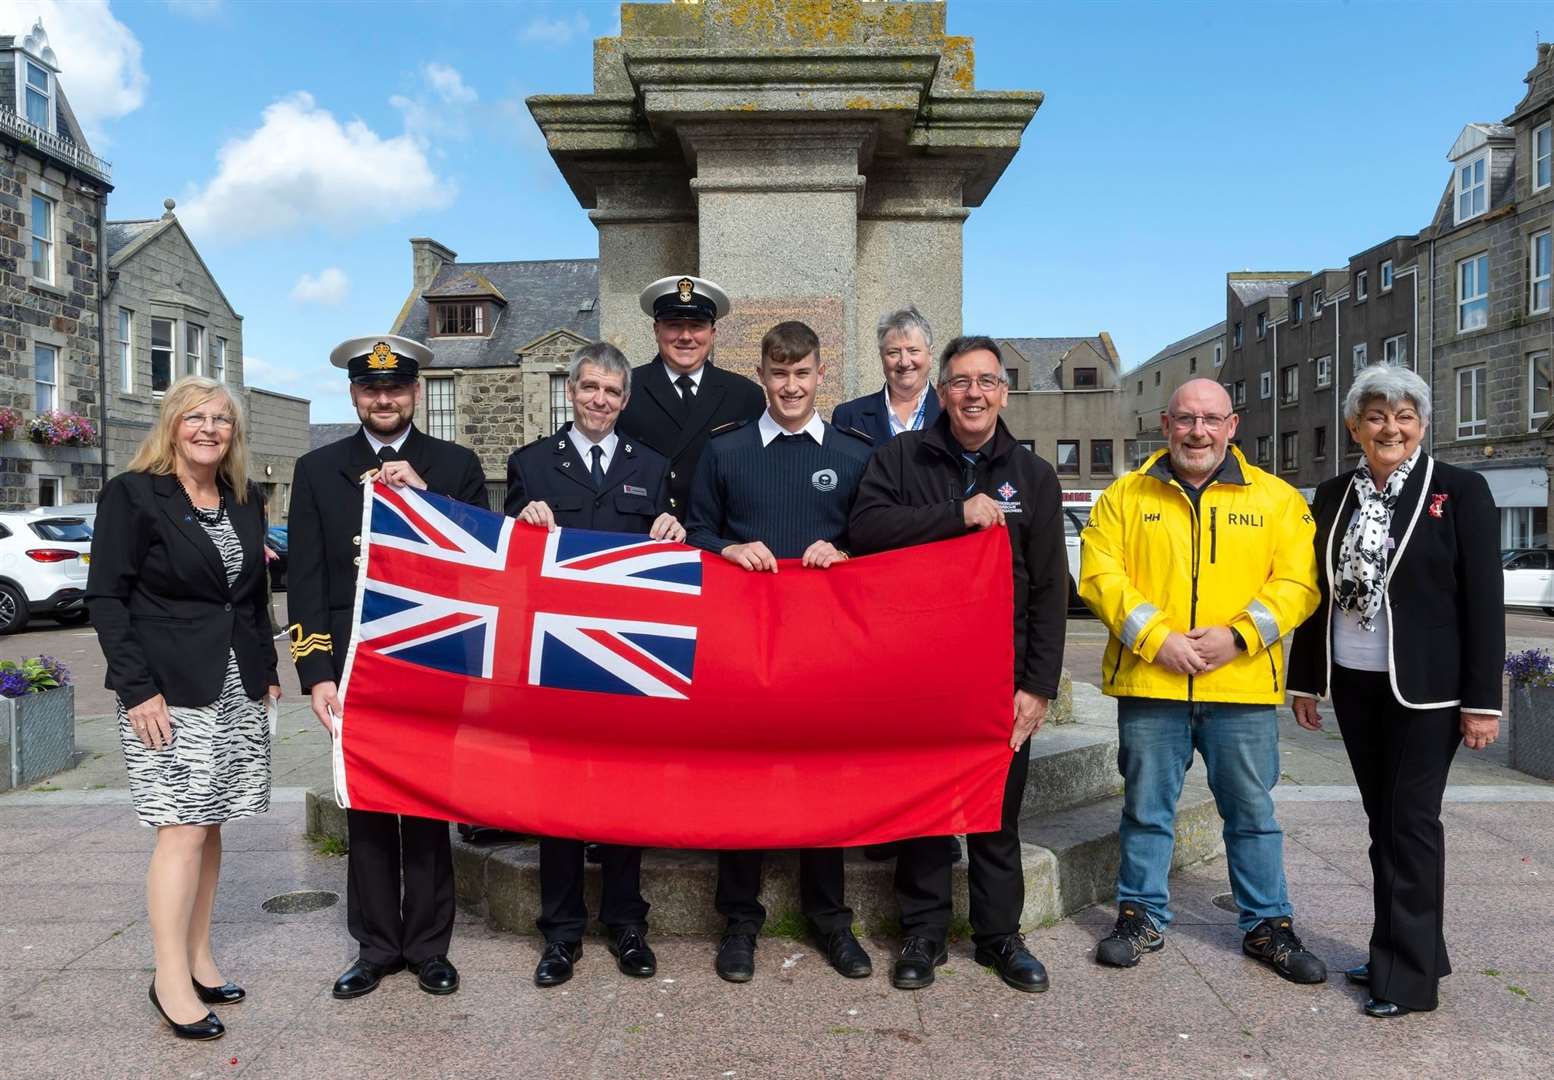 The Red Ensign was raised in Fraserburgh on Friday.